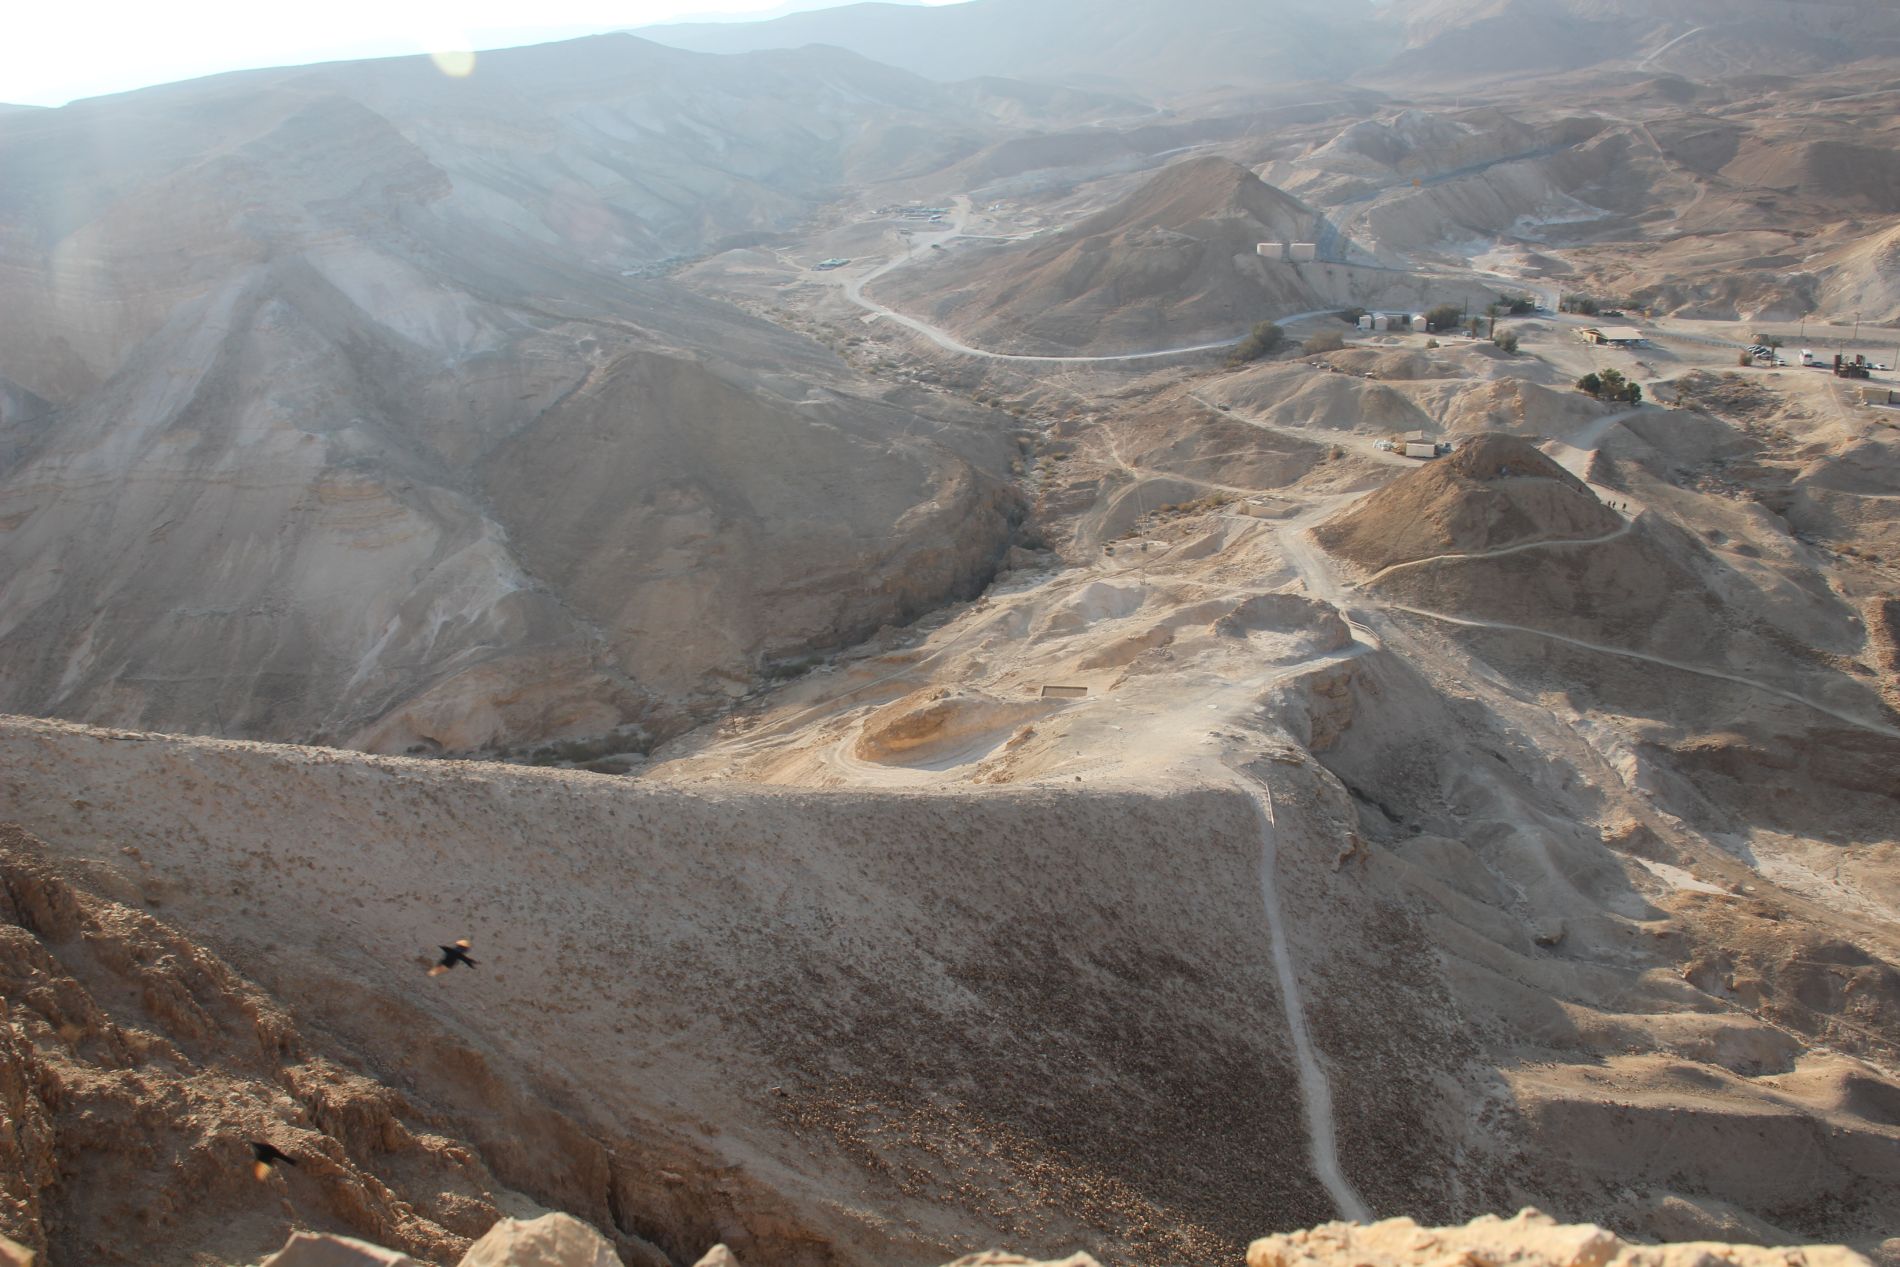 A famous ramp, built by Roman soldiers during a siege, leads to the top of Masada.